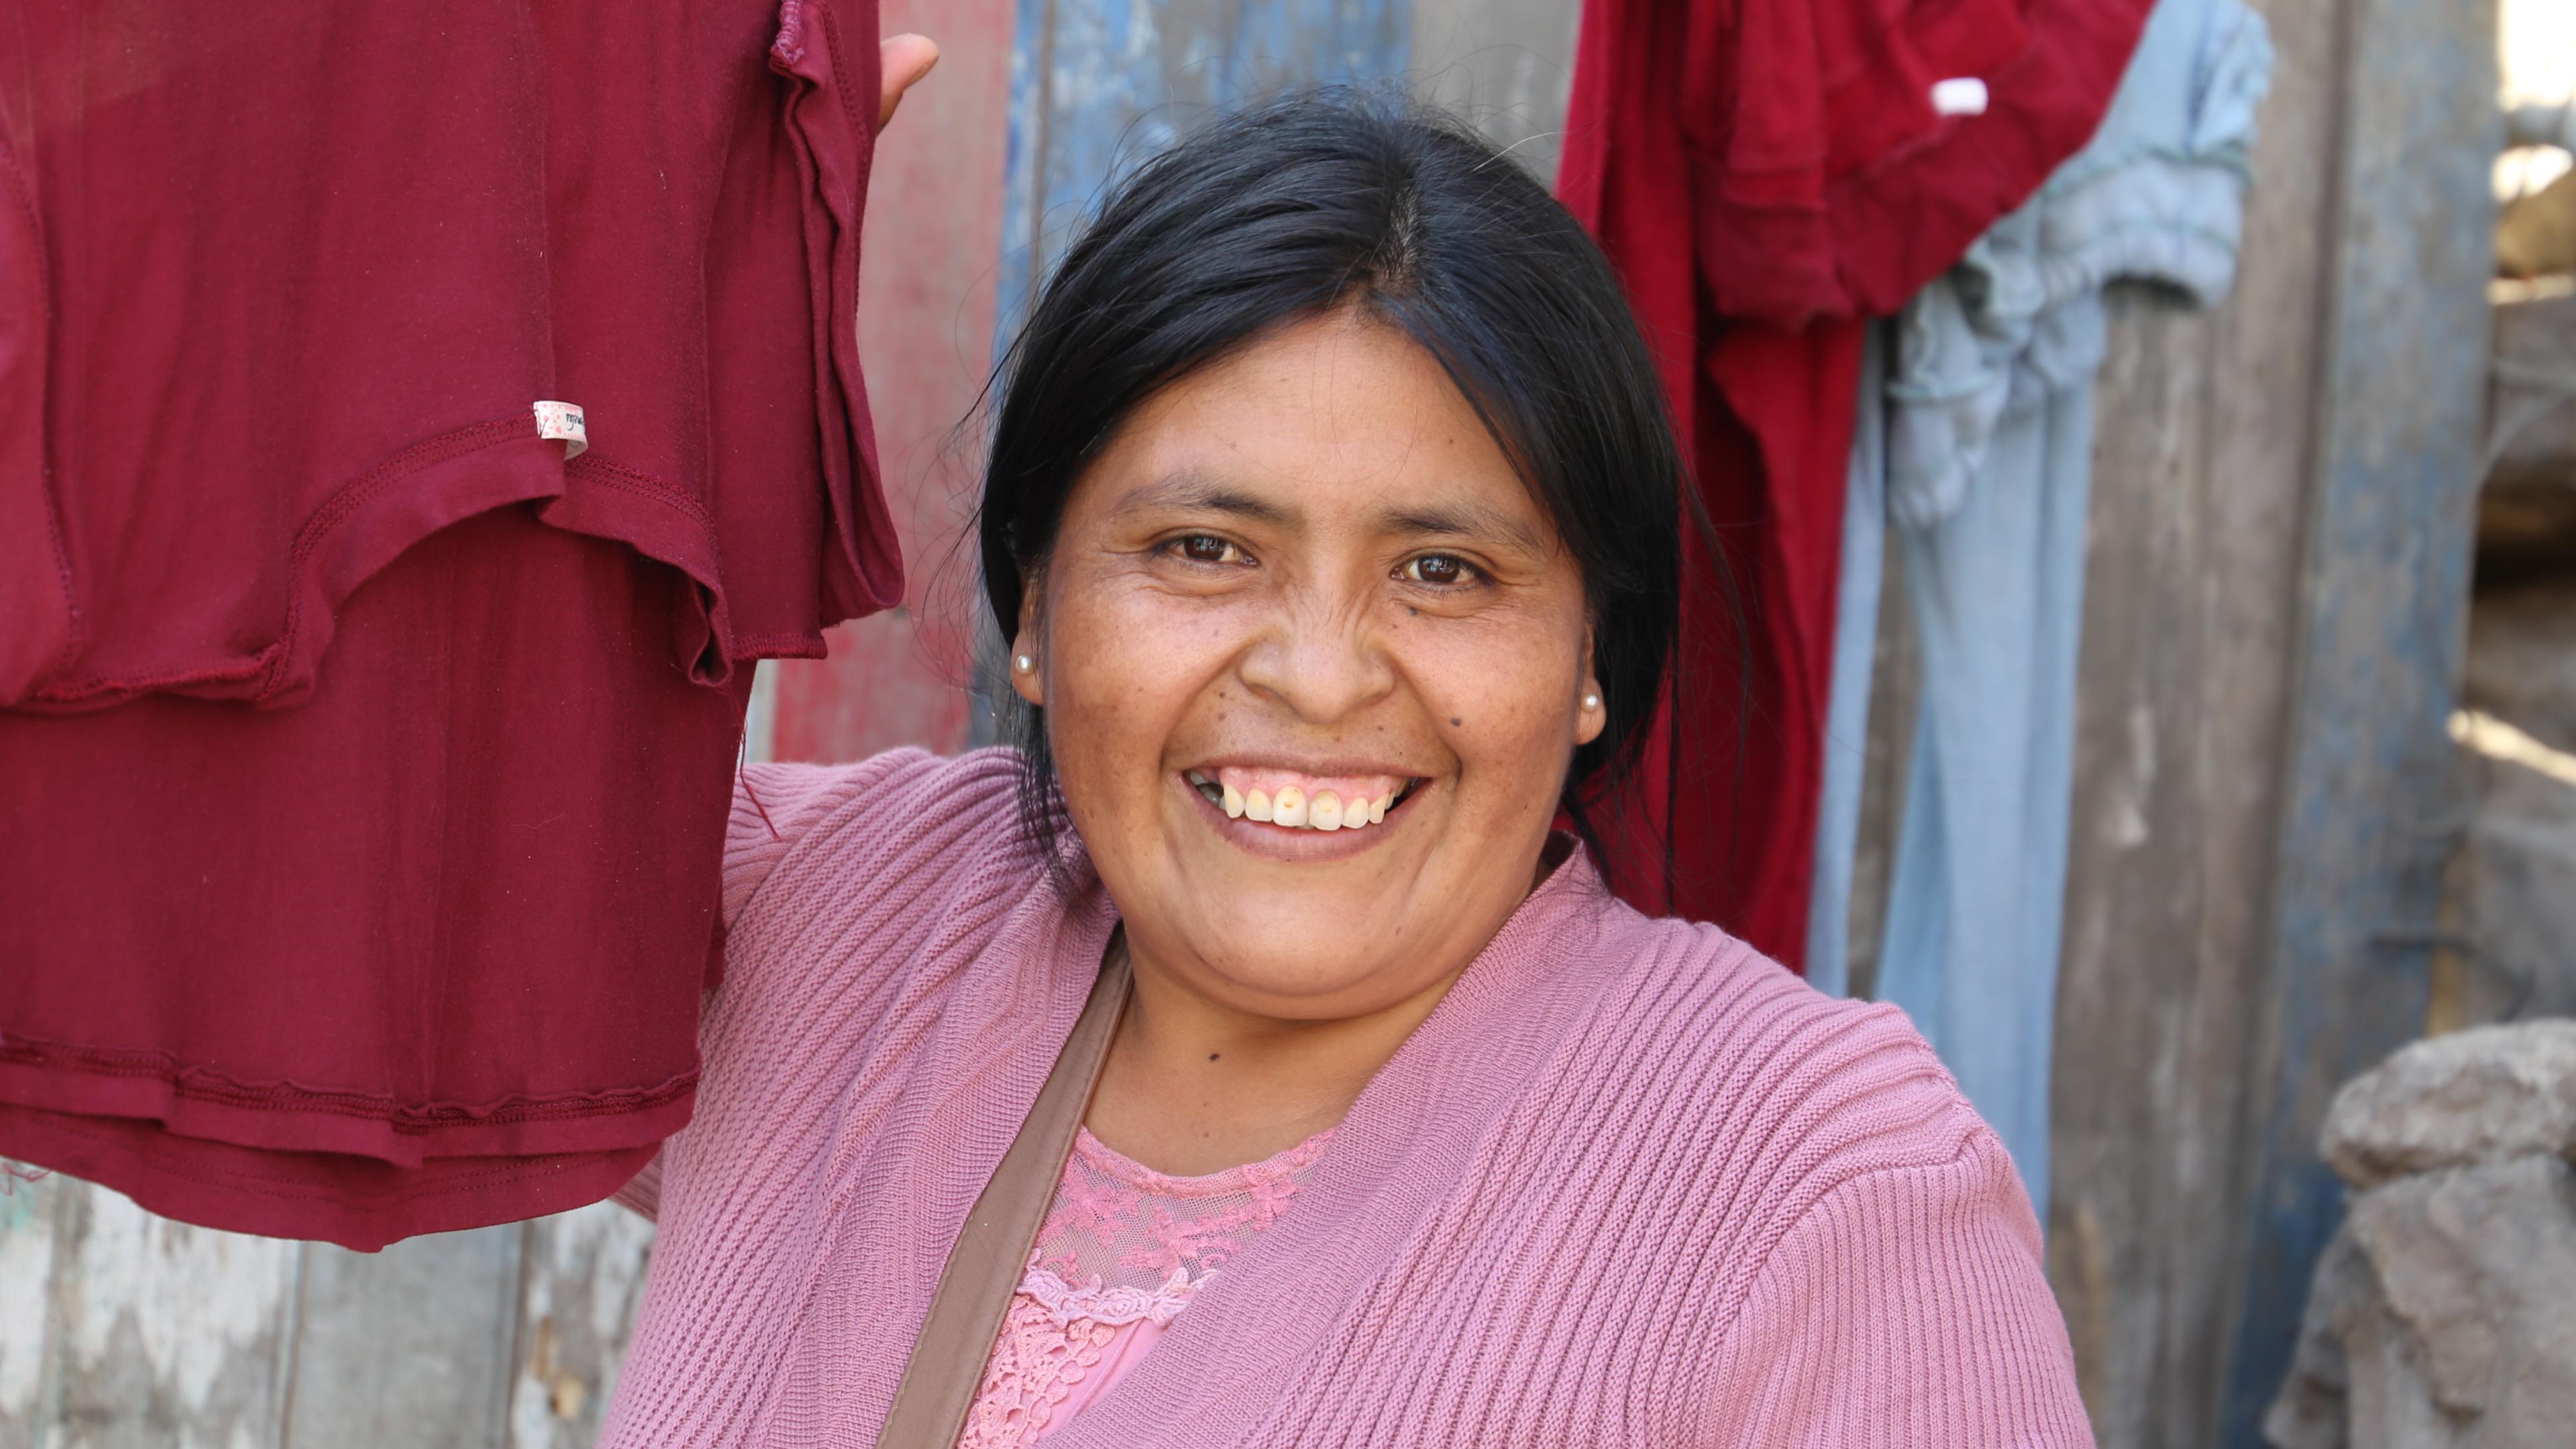 Peruvian woman in front of clothesline with red clothes